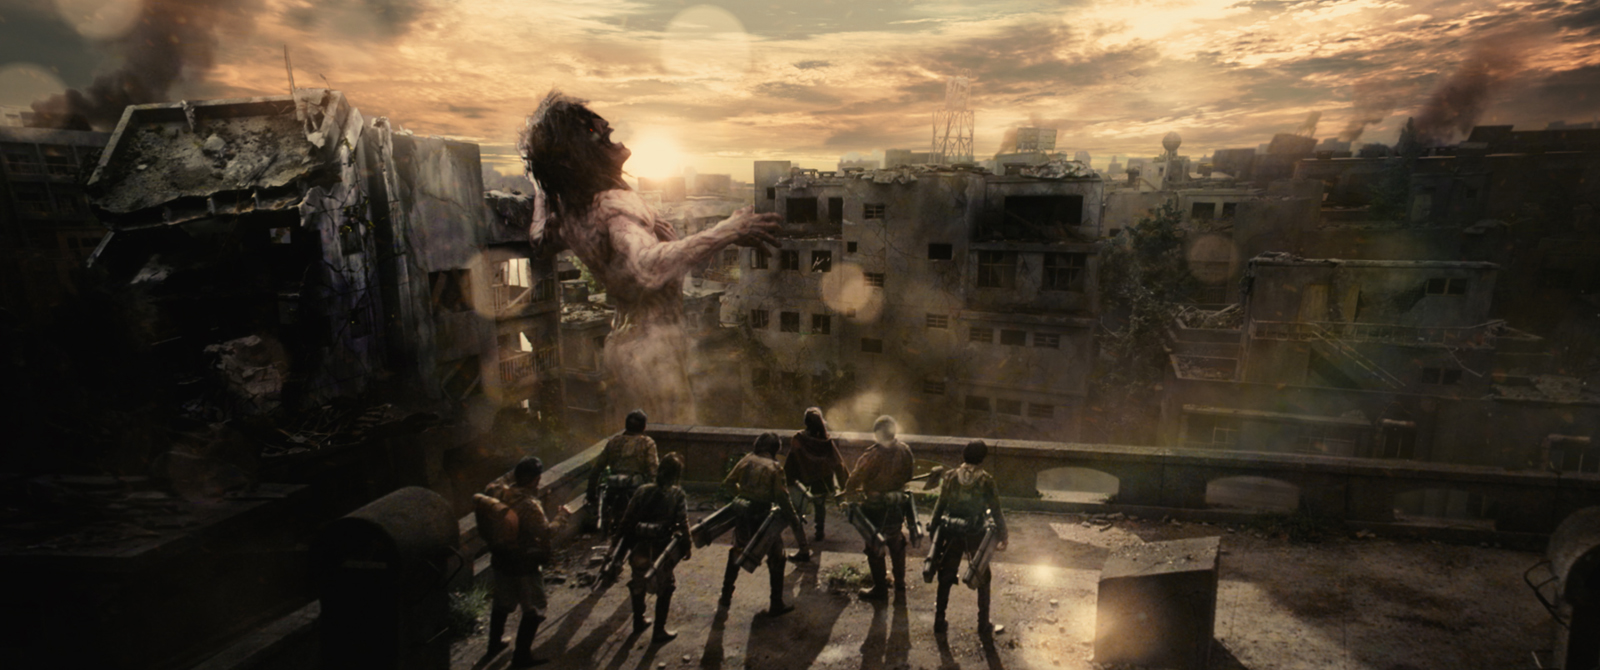 Attack on Titan (Part 2): End of the World